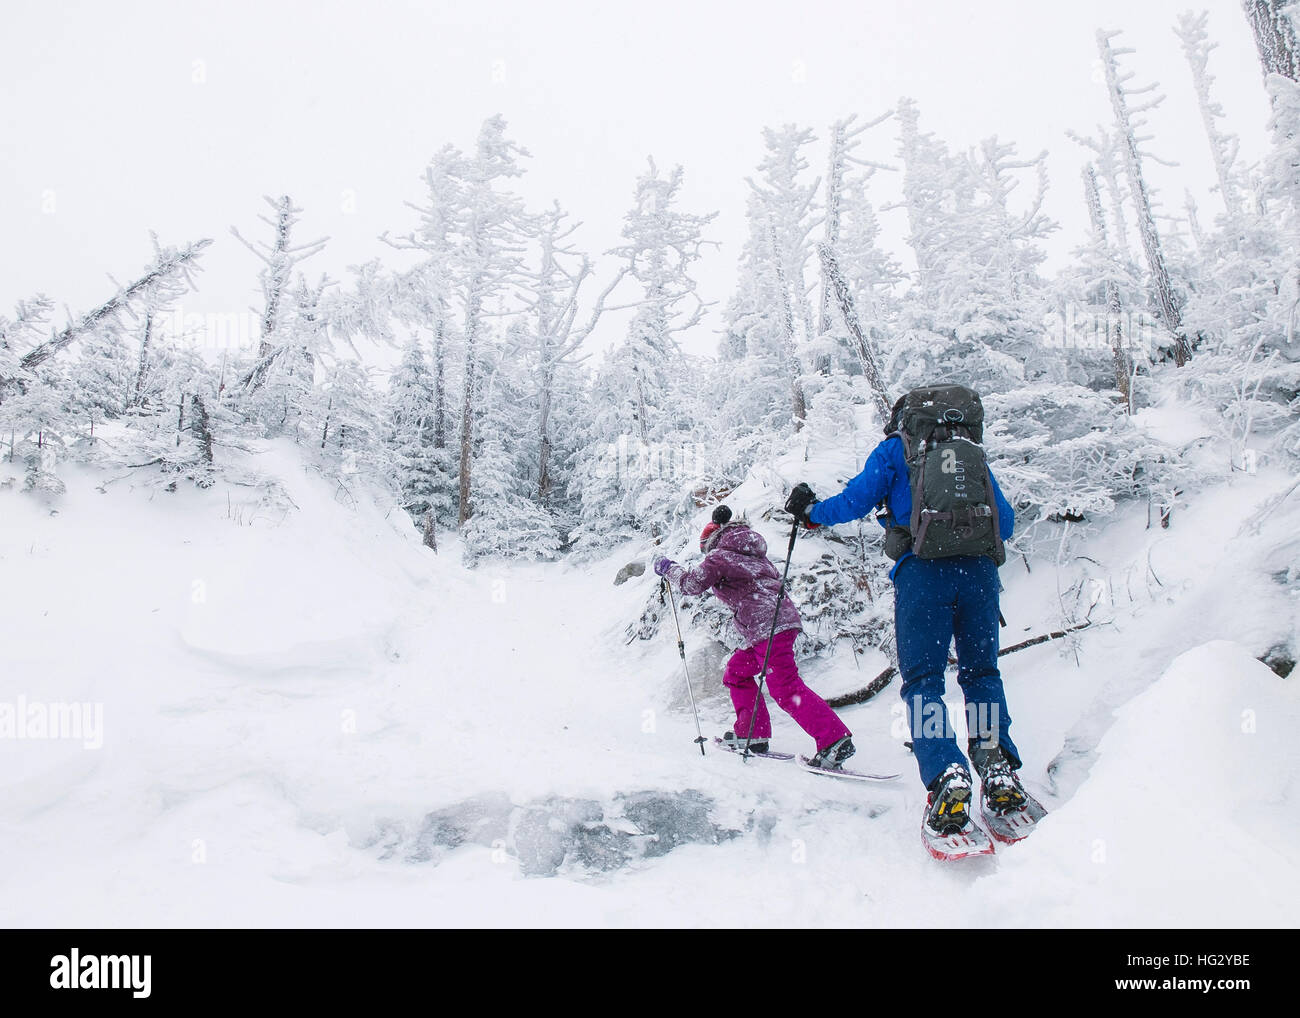 A man and a young girl snowshoe up a snowy mountain in Mont-Megantic, Quebec on Saturday, December 31, 2016. Stock Photo